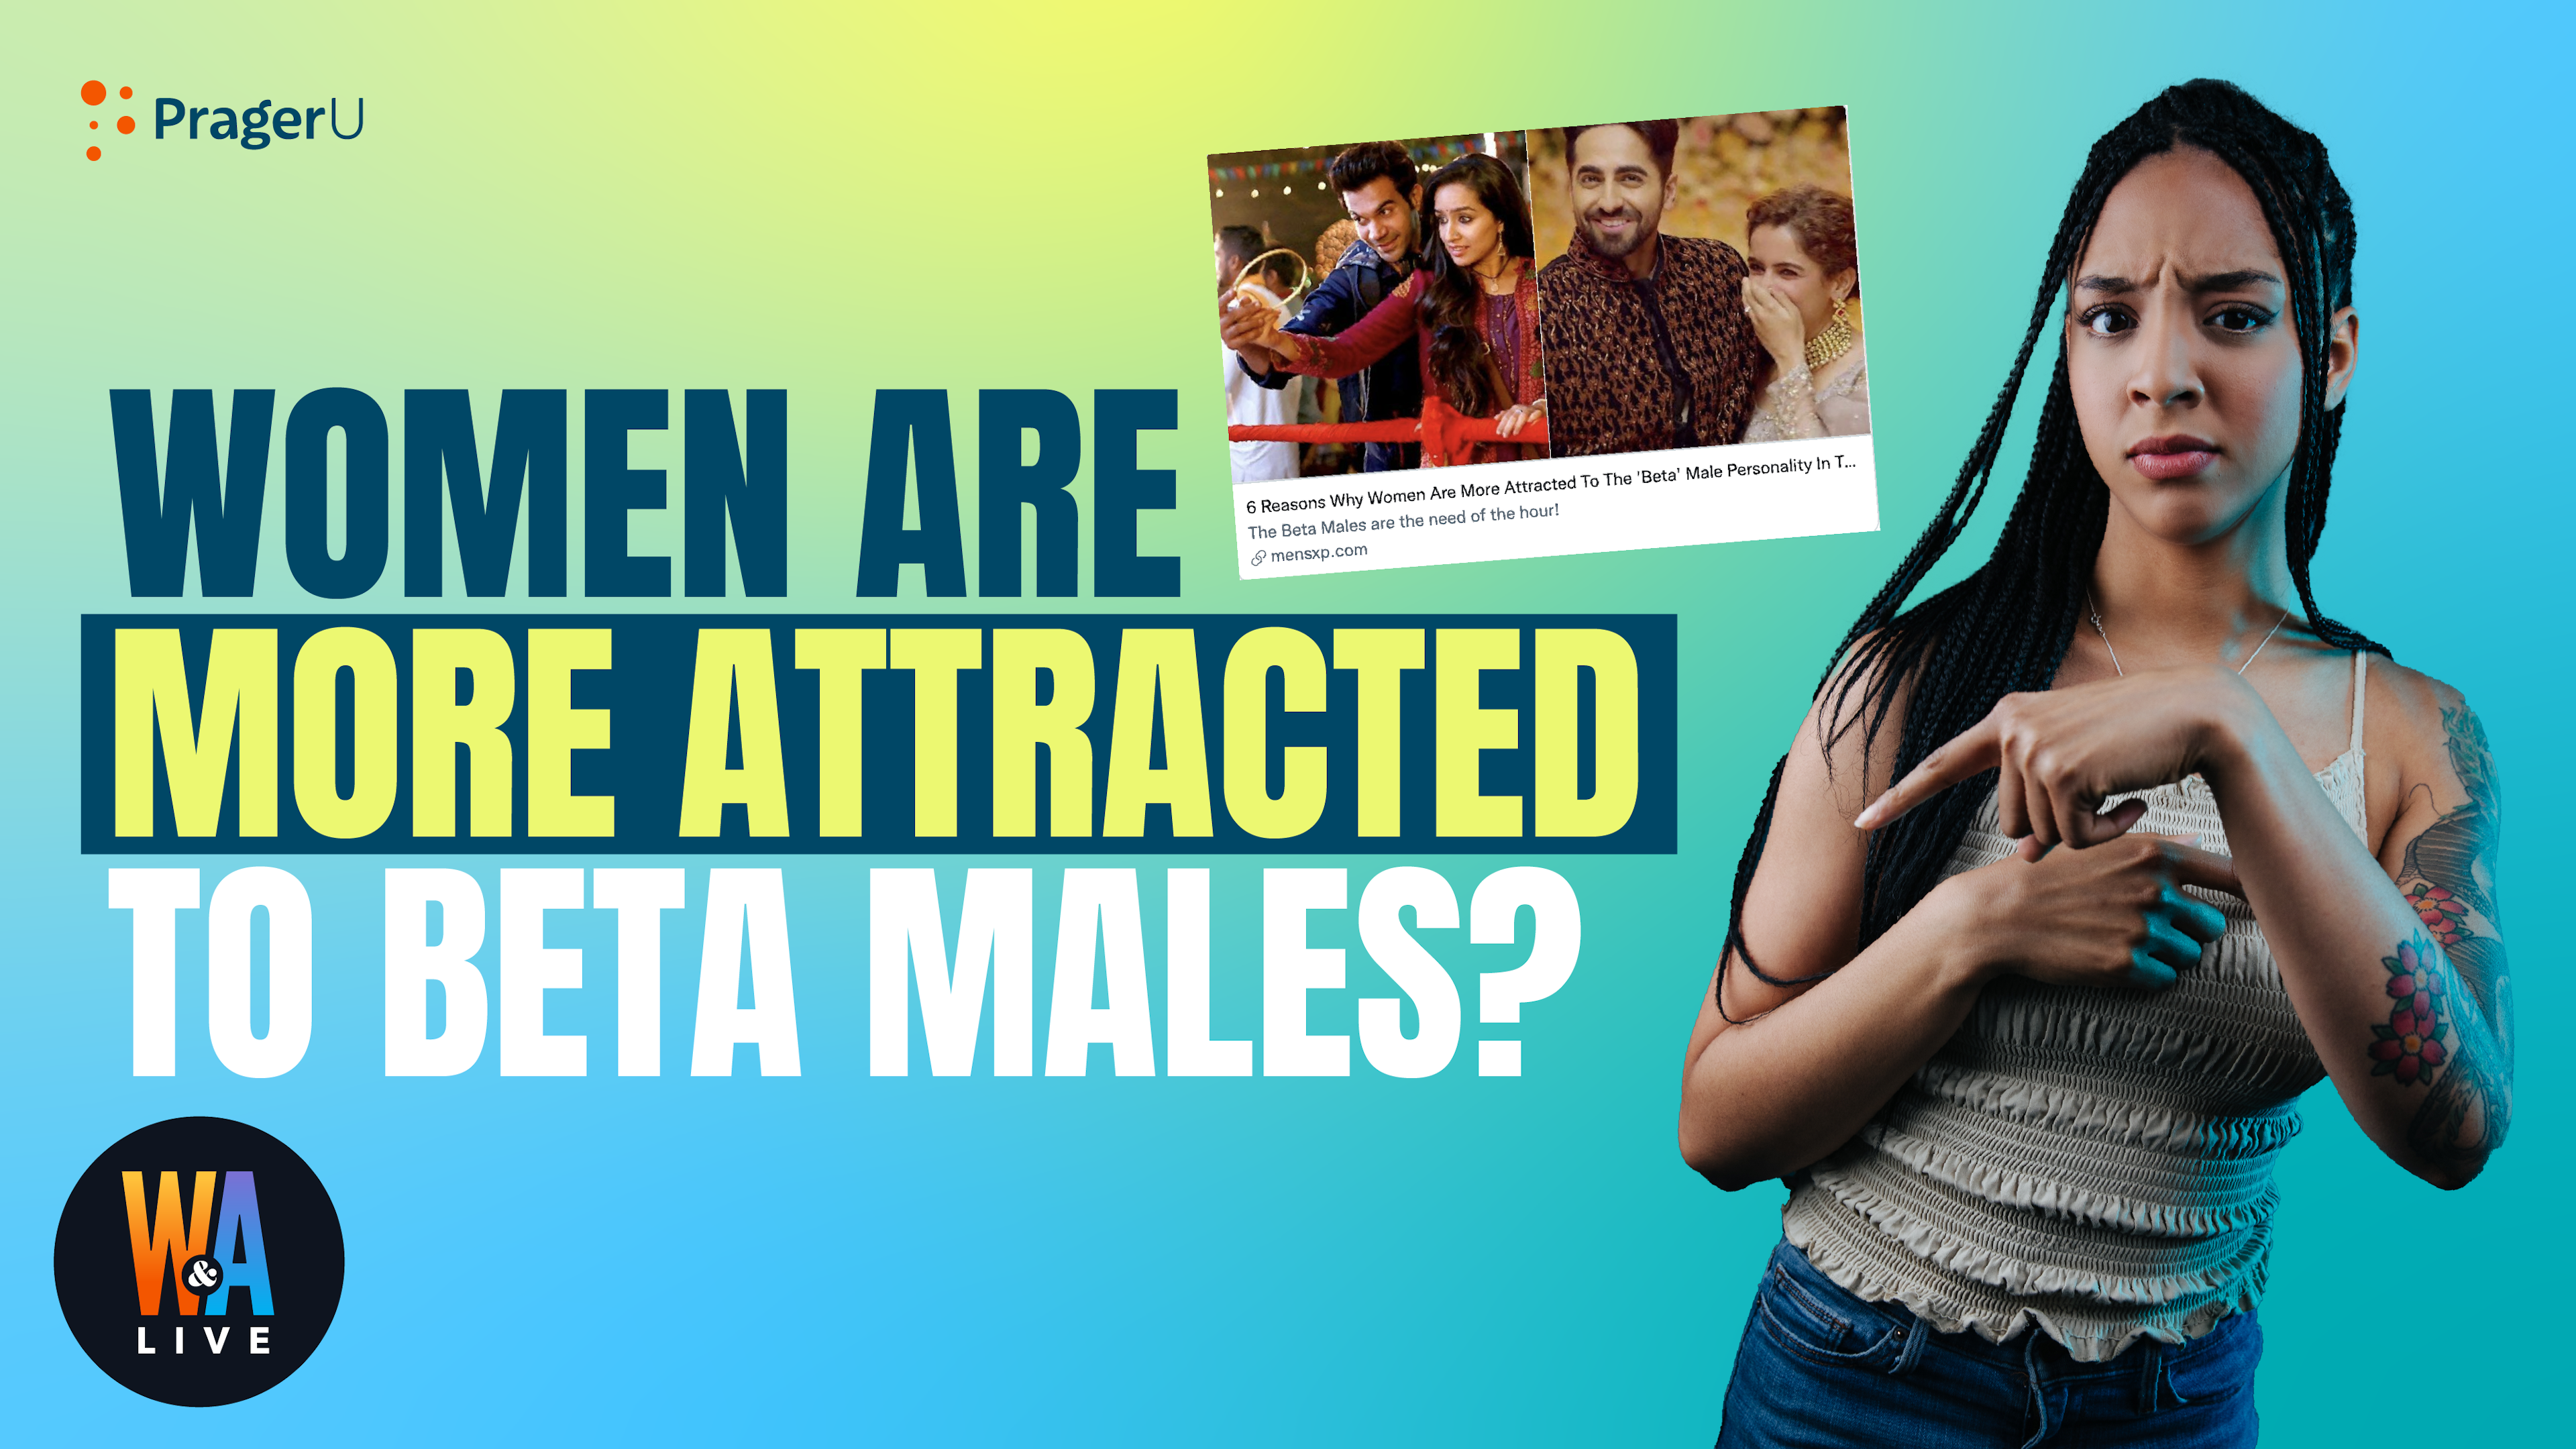 Women Are More Attracted to Beta Males?: 9/20/2021